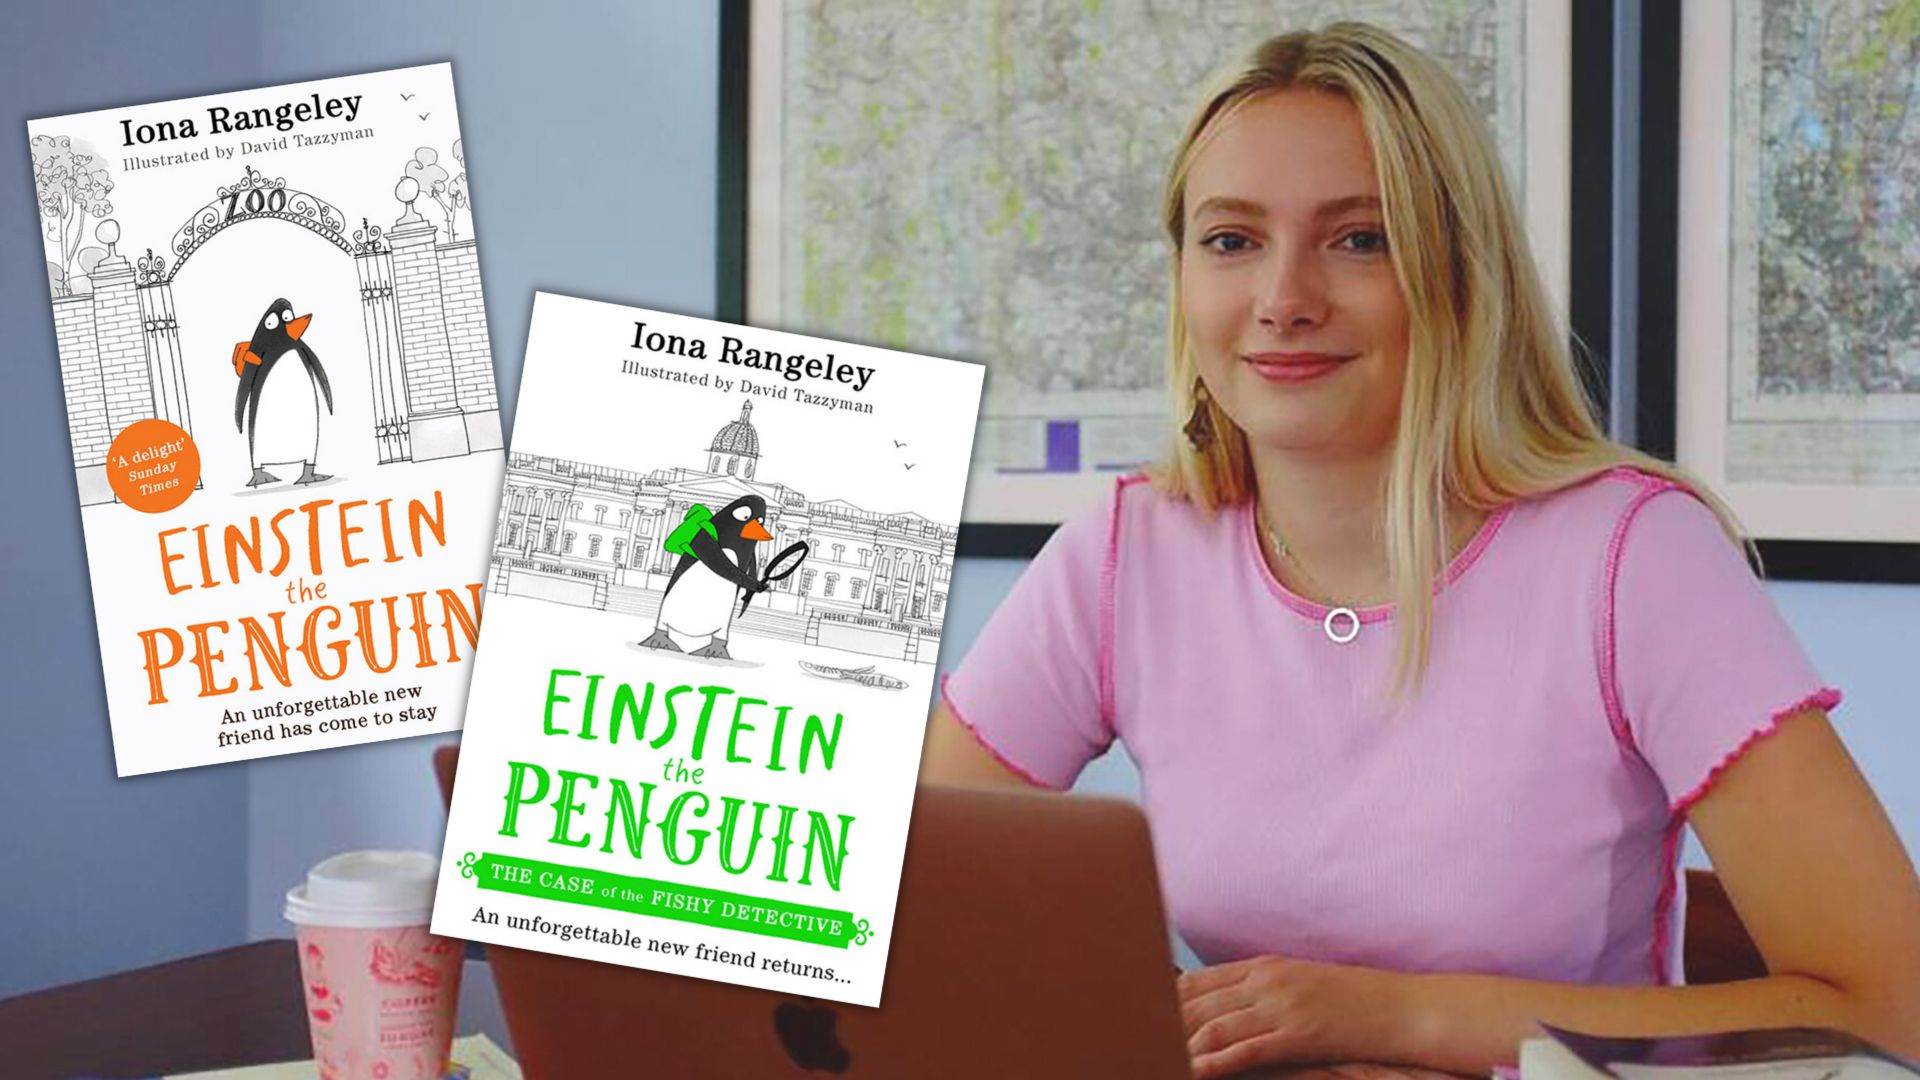 Author Iona Rangeley and the covers of two Einstein the Penguin books